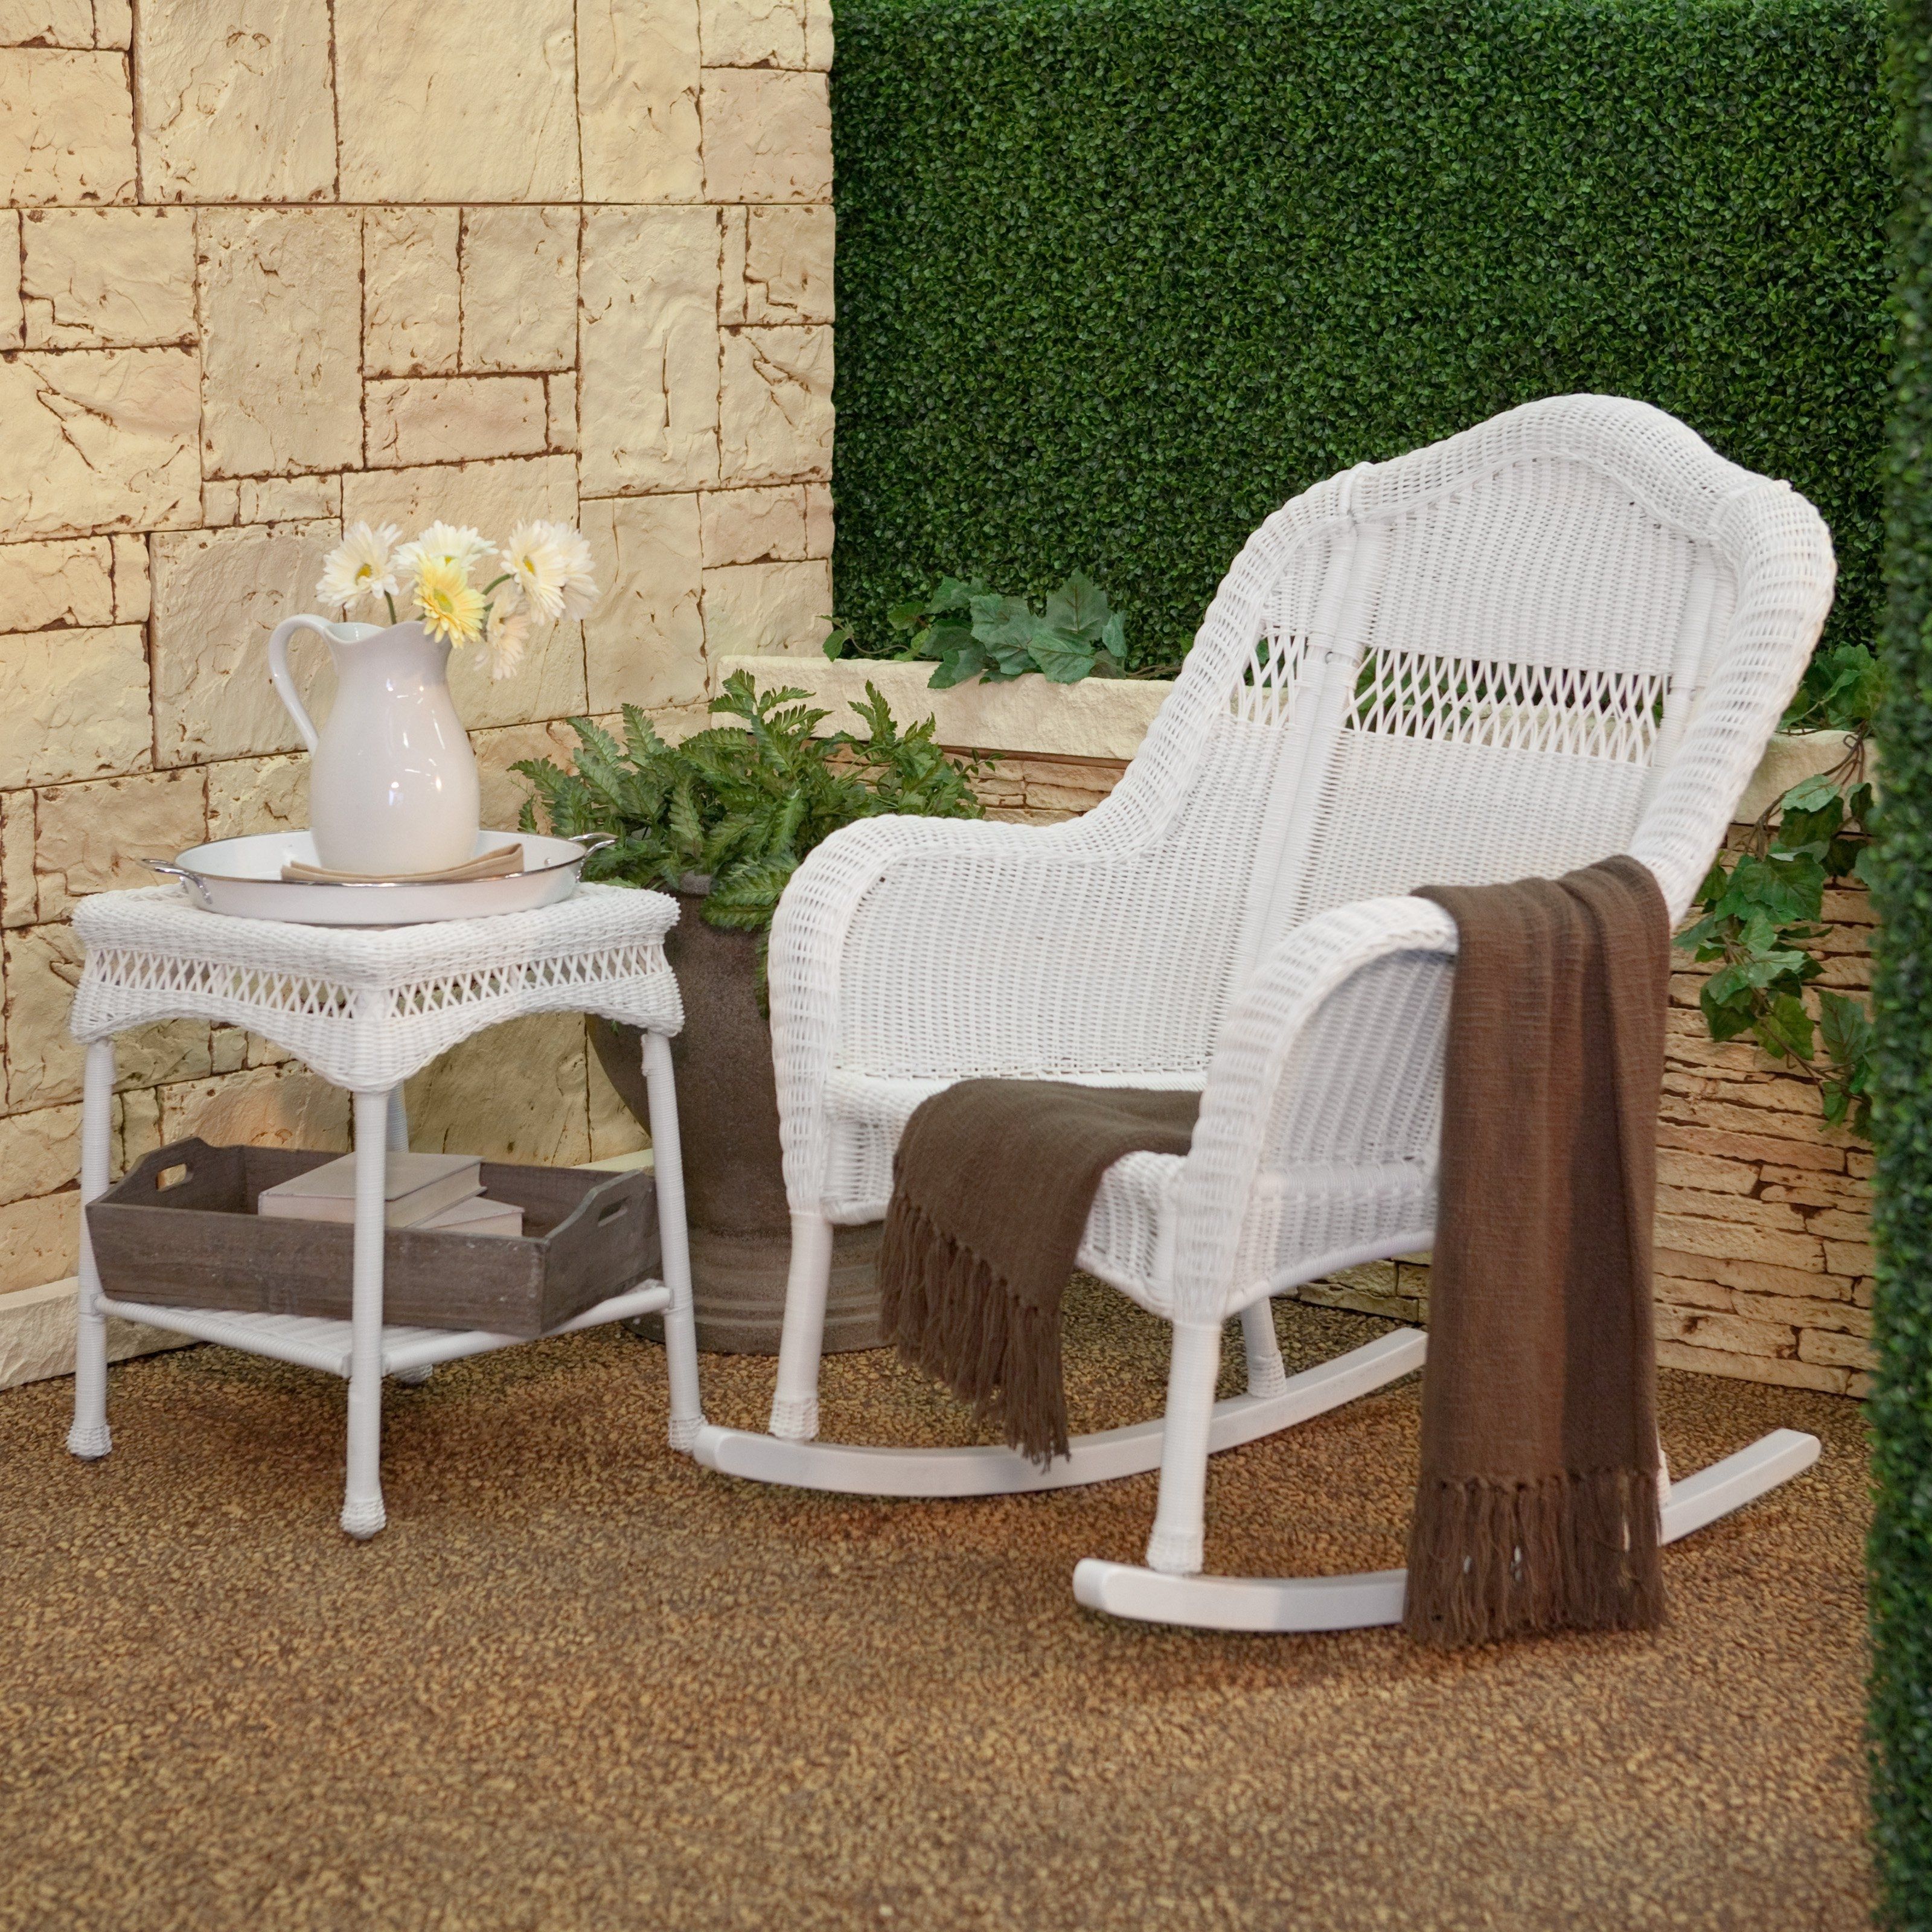 15 Ideas of Small Patio Rocking Chairs